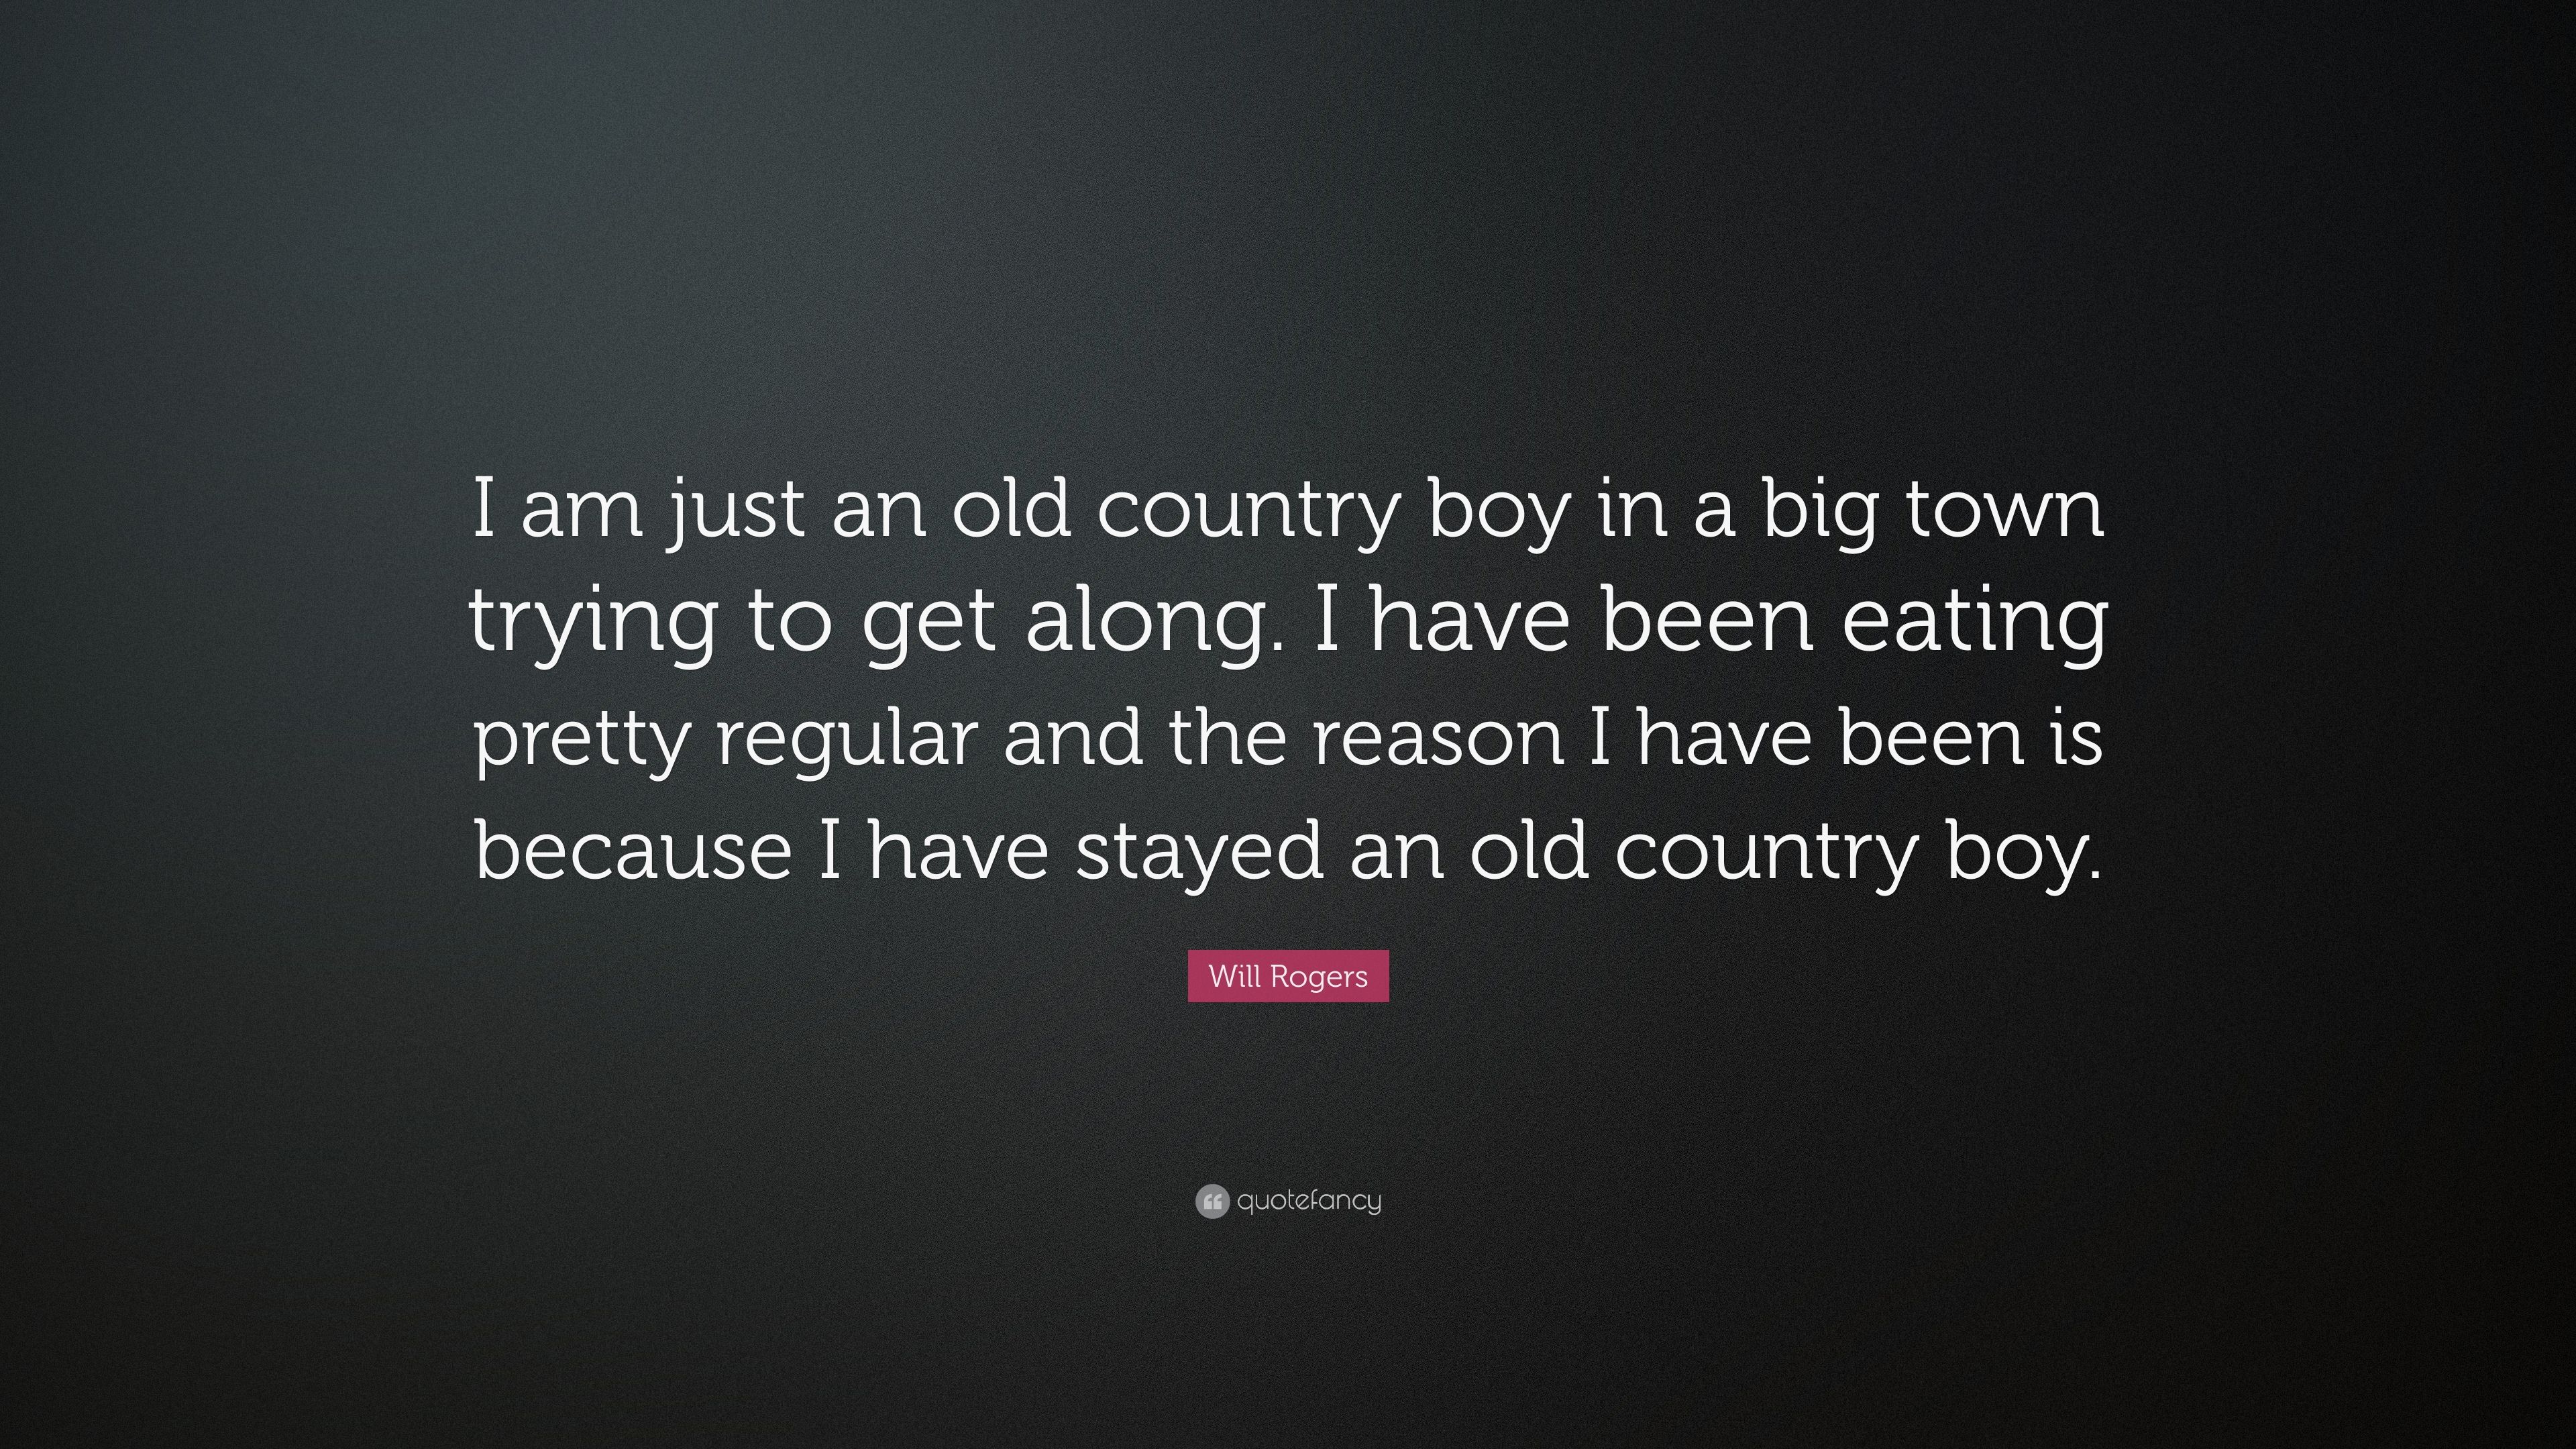 Will Rogers Quote: “I am just an old country boy in a big town